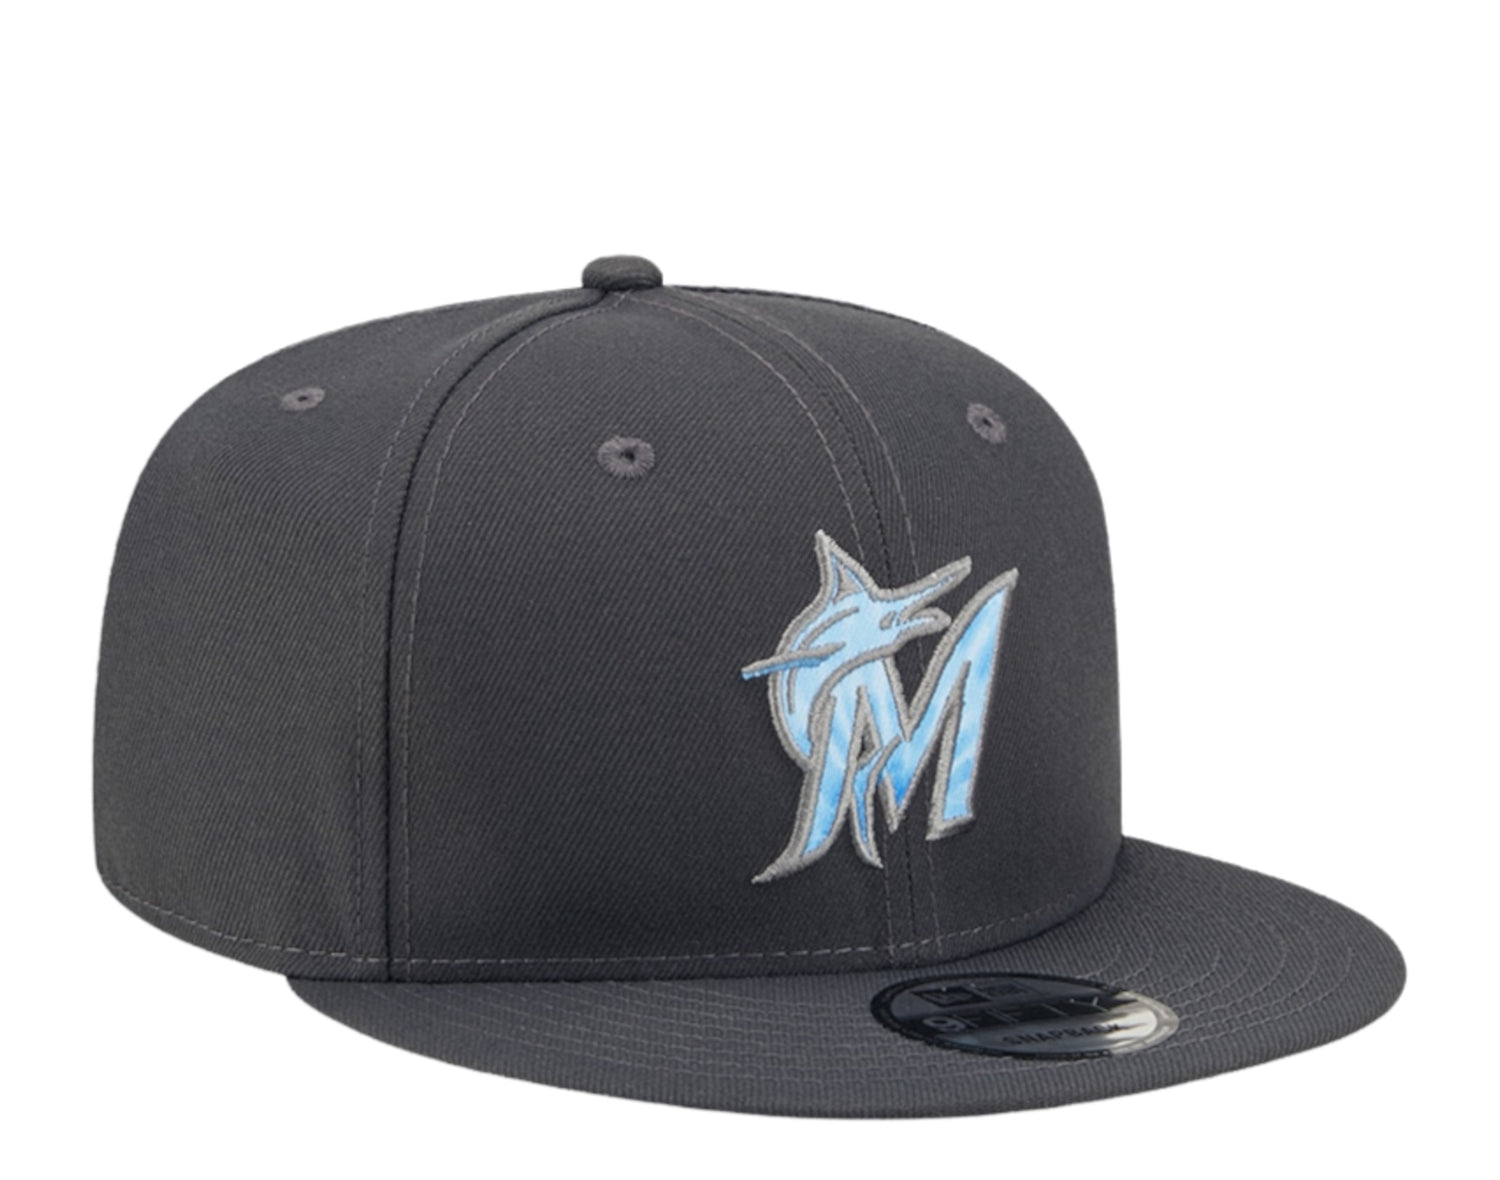 New Era 9Fifty MLB Miami Marlins Father's Day Snapback Hat